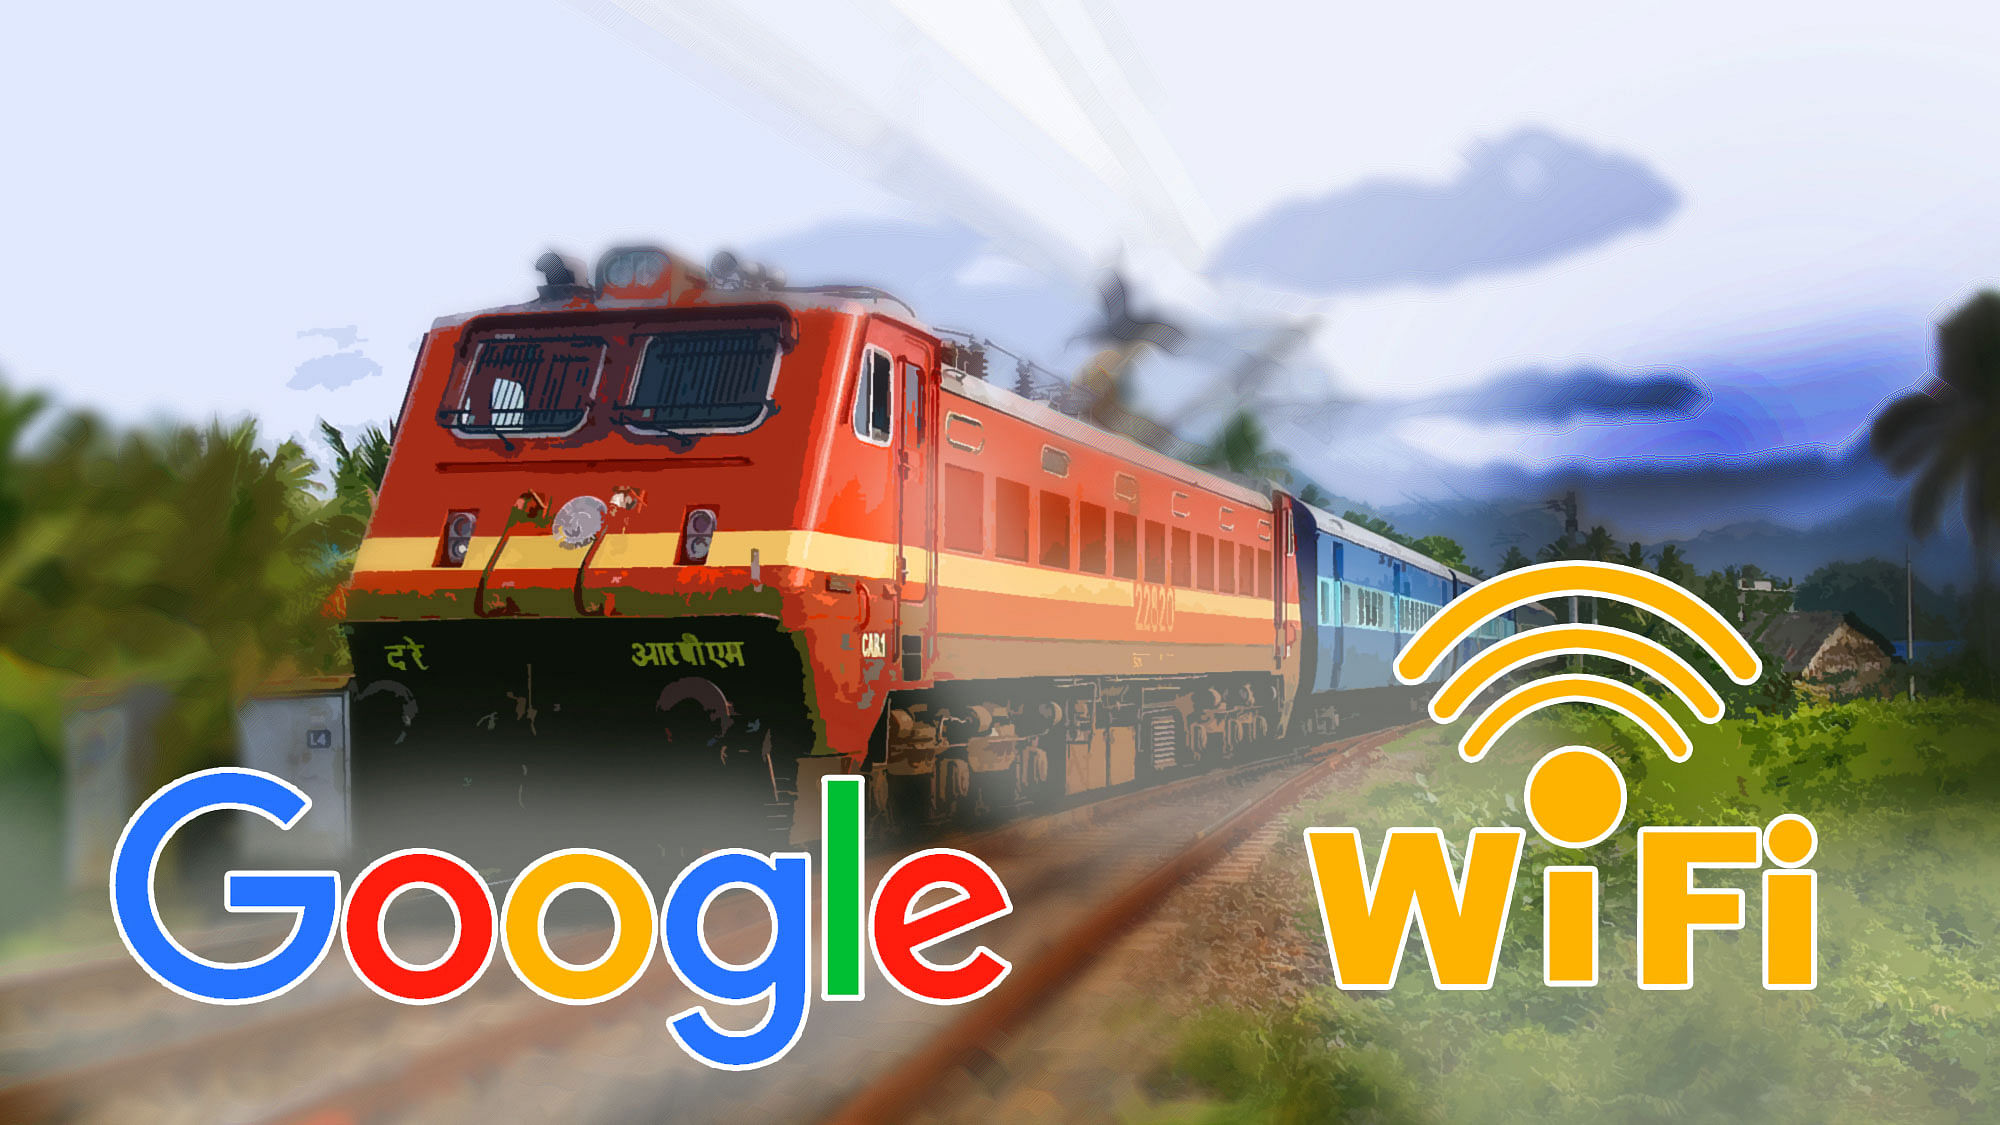 Google and Railtel will offer WiFi across 100 stations this year. (Photo: <b>The Quint</b>)